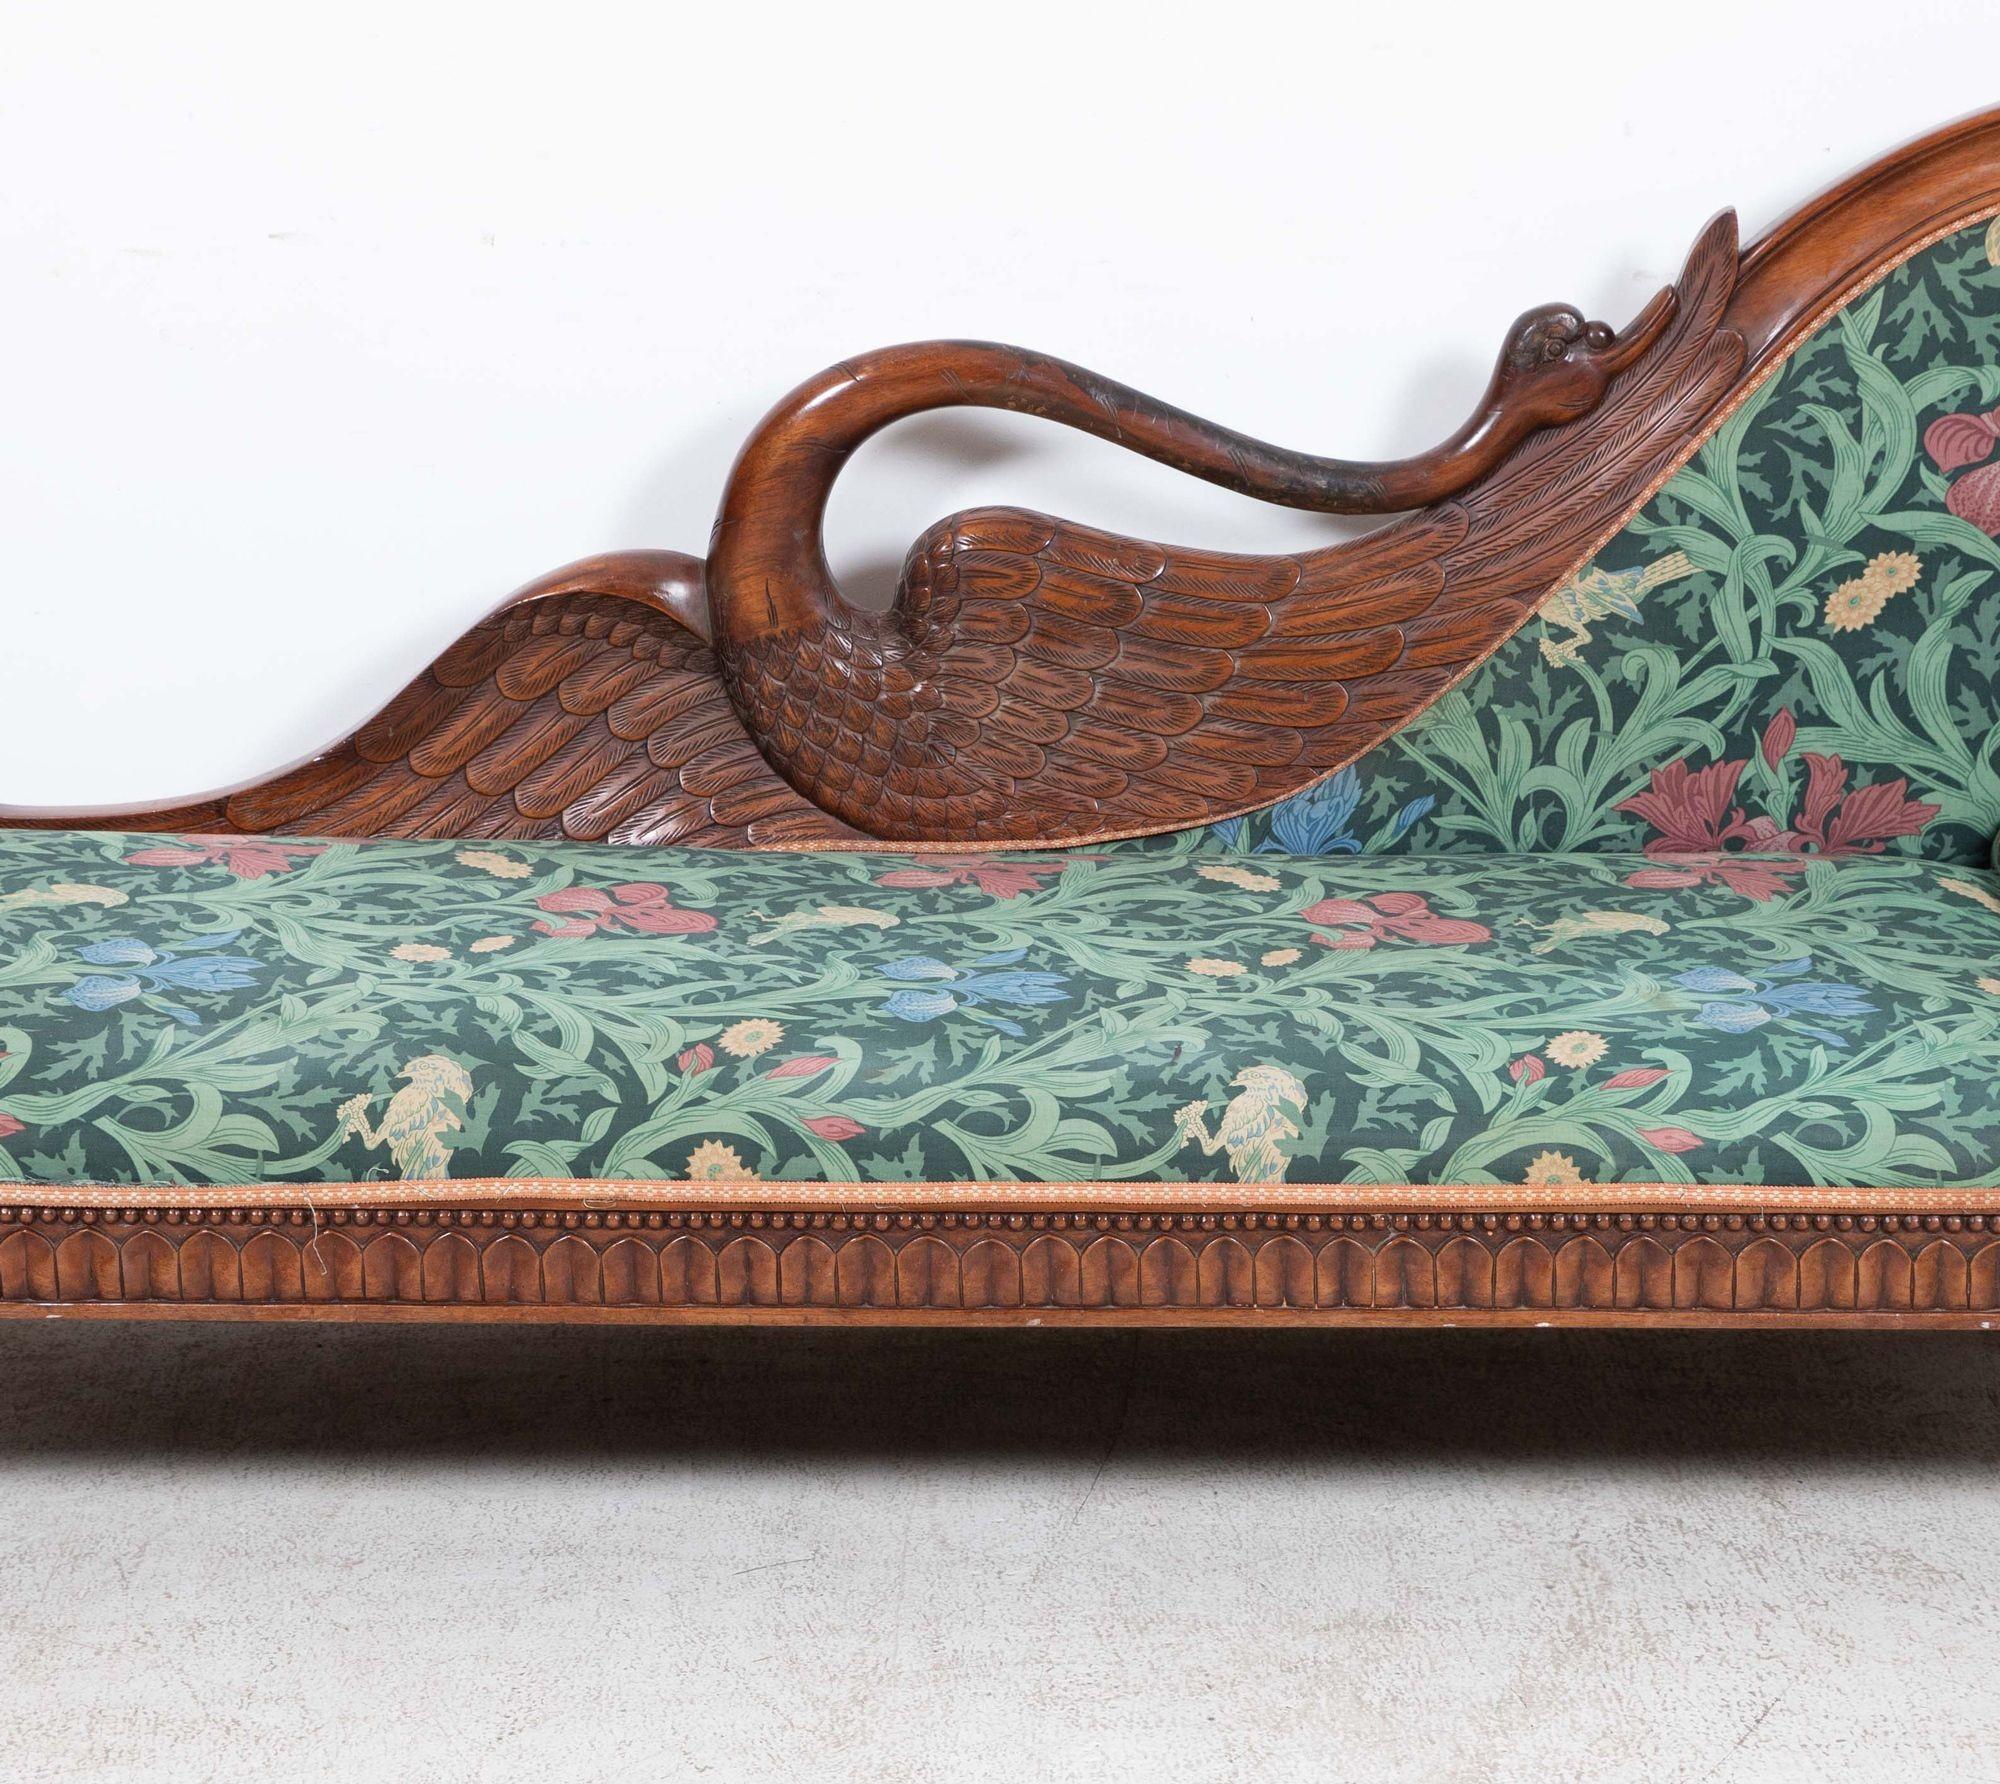 Circa 1860
19thC French Empire Walnut Chaise lounge / daybed
With existing William Morris fabric professionally cleaned
but with a few small existing stains.

Measures: W223 x D65 x H94 cm.